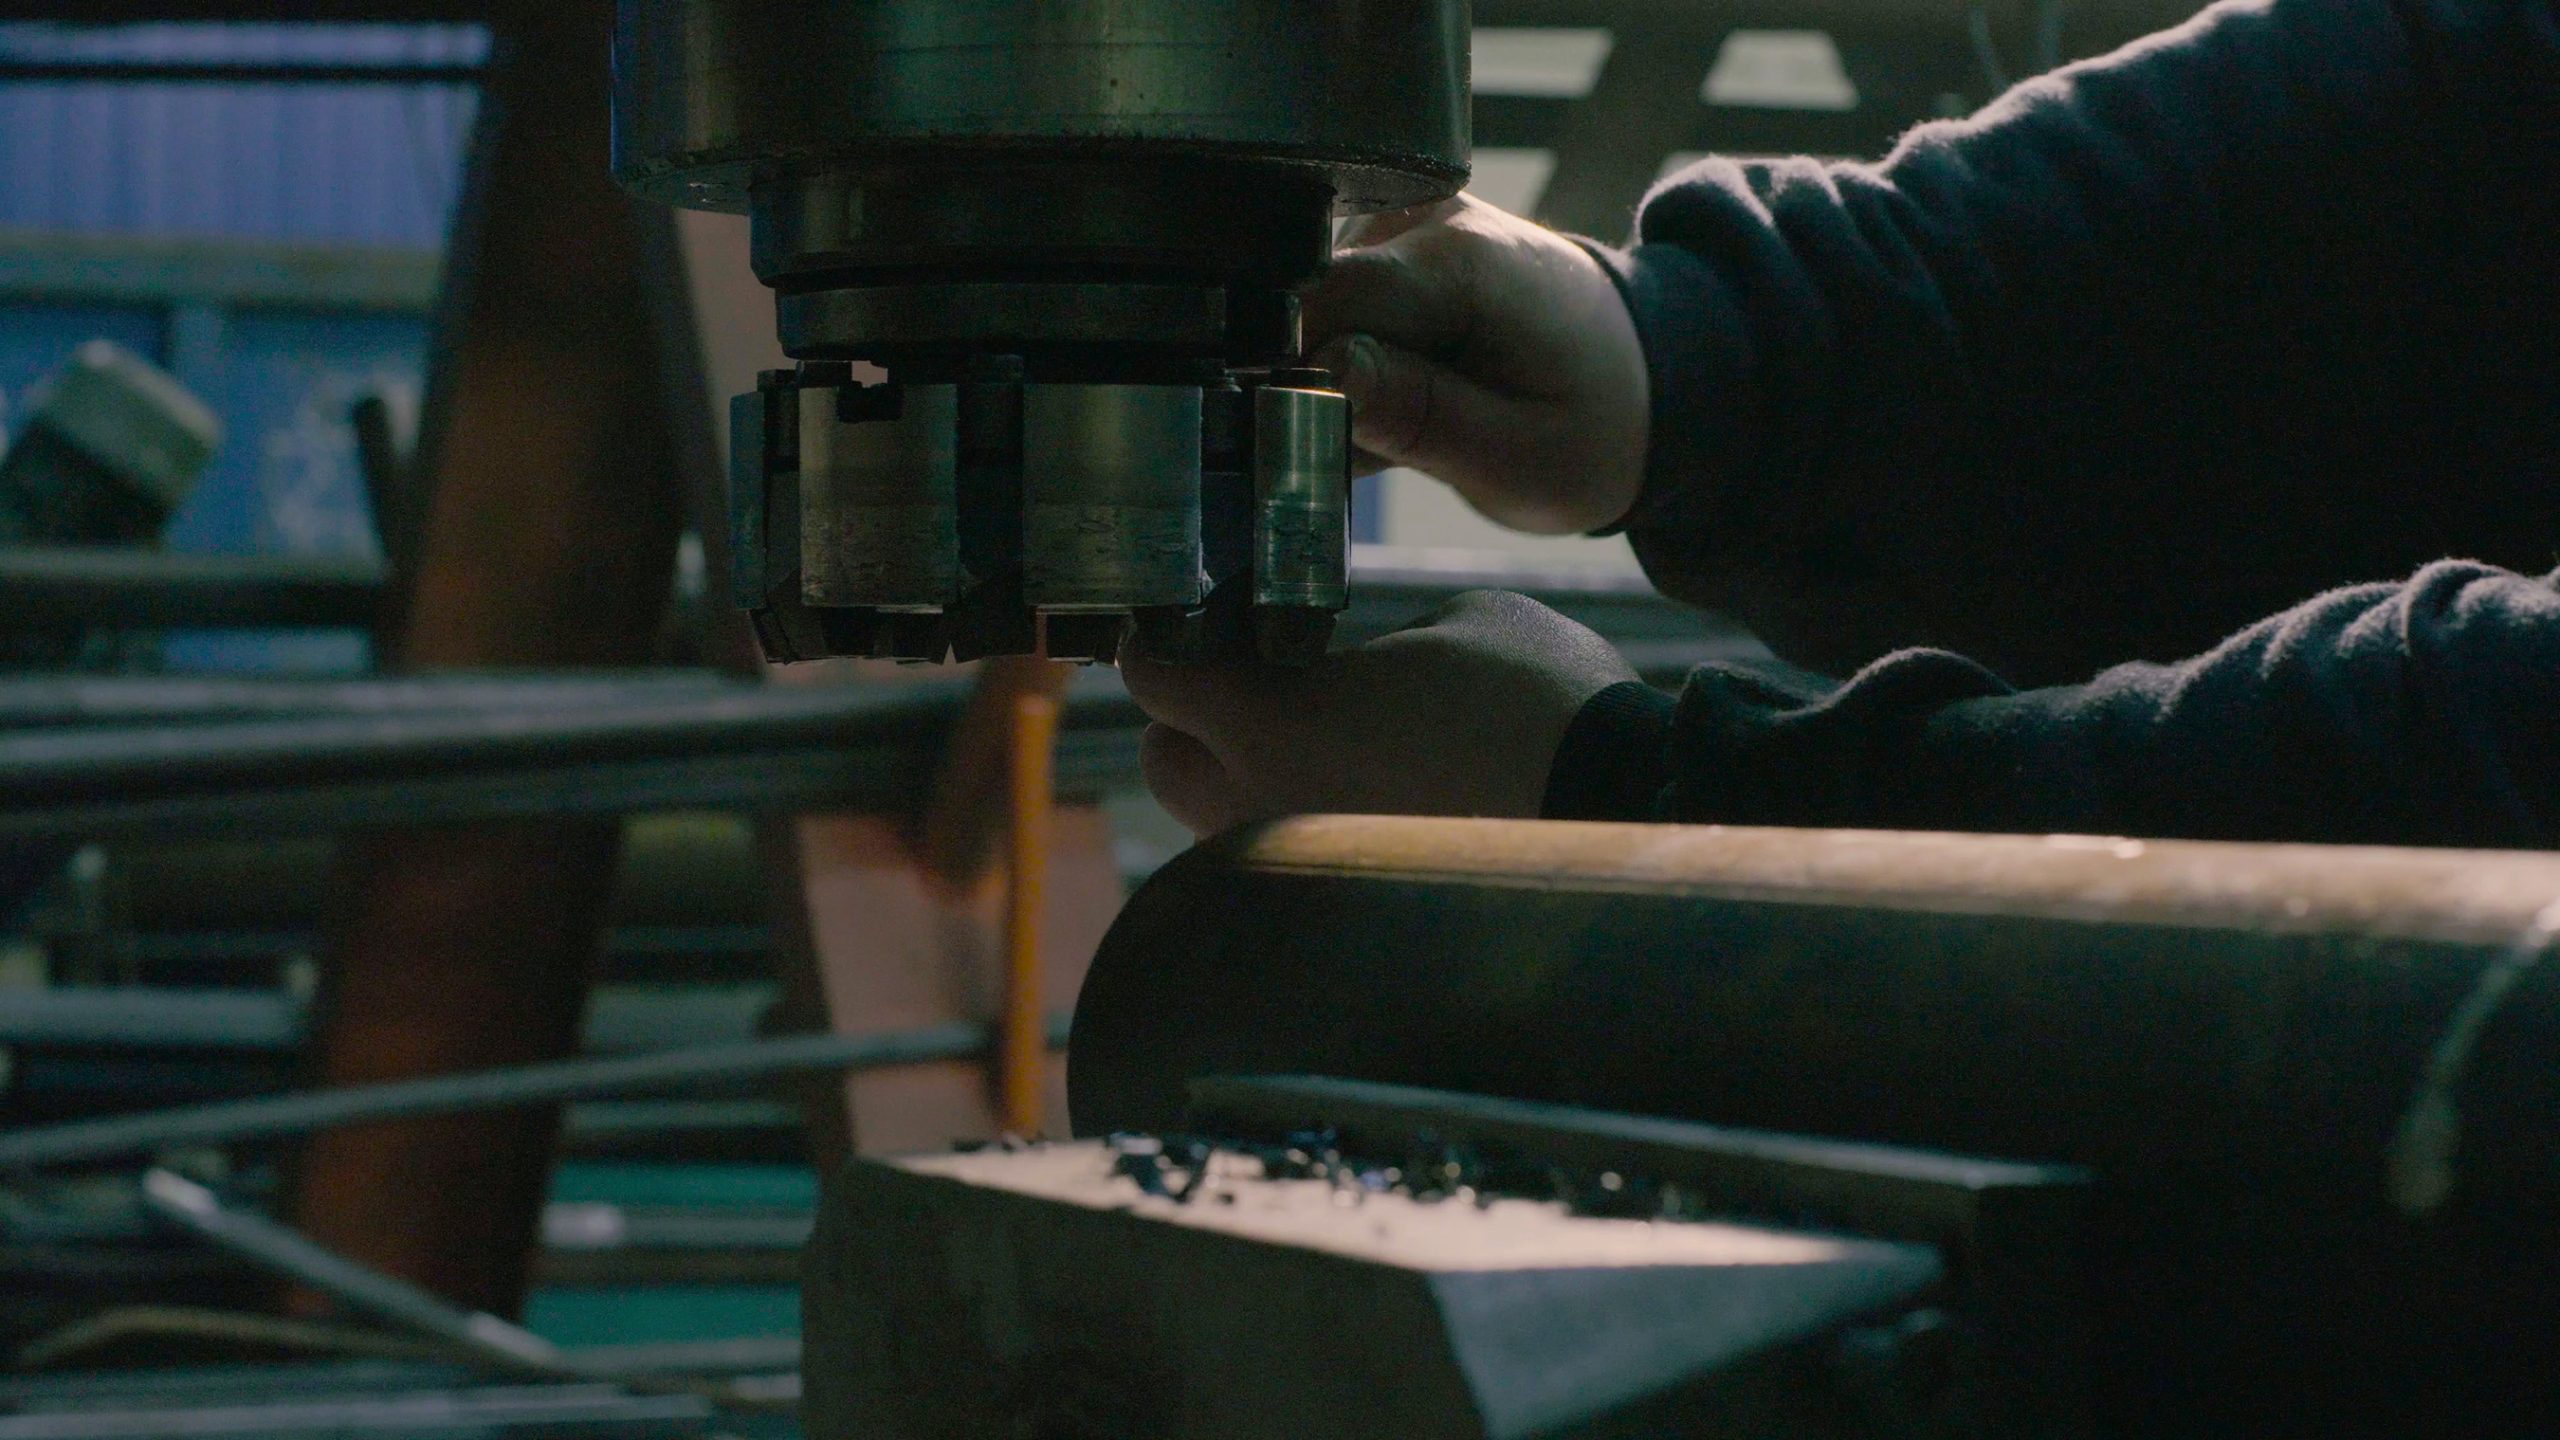 Close up of men's hands screwing the milling cutter on the milling machine